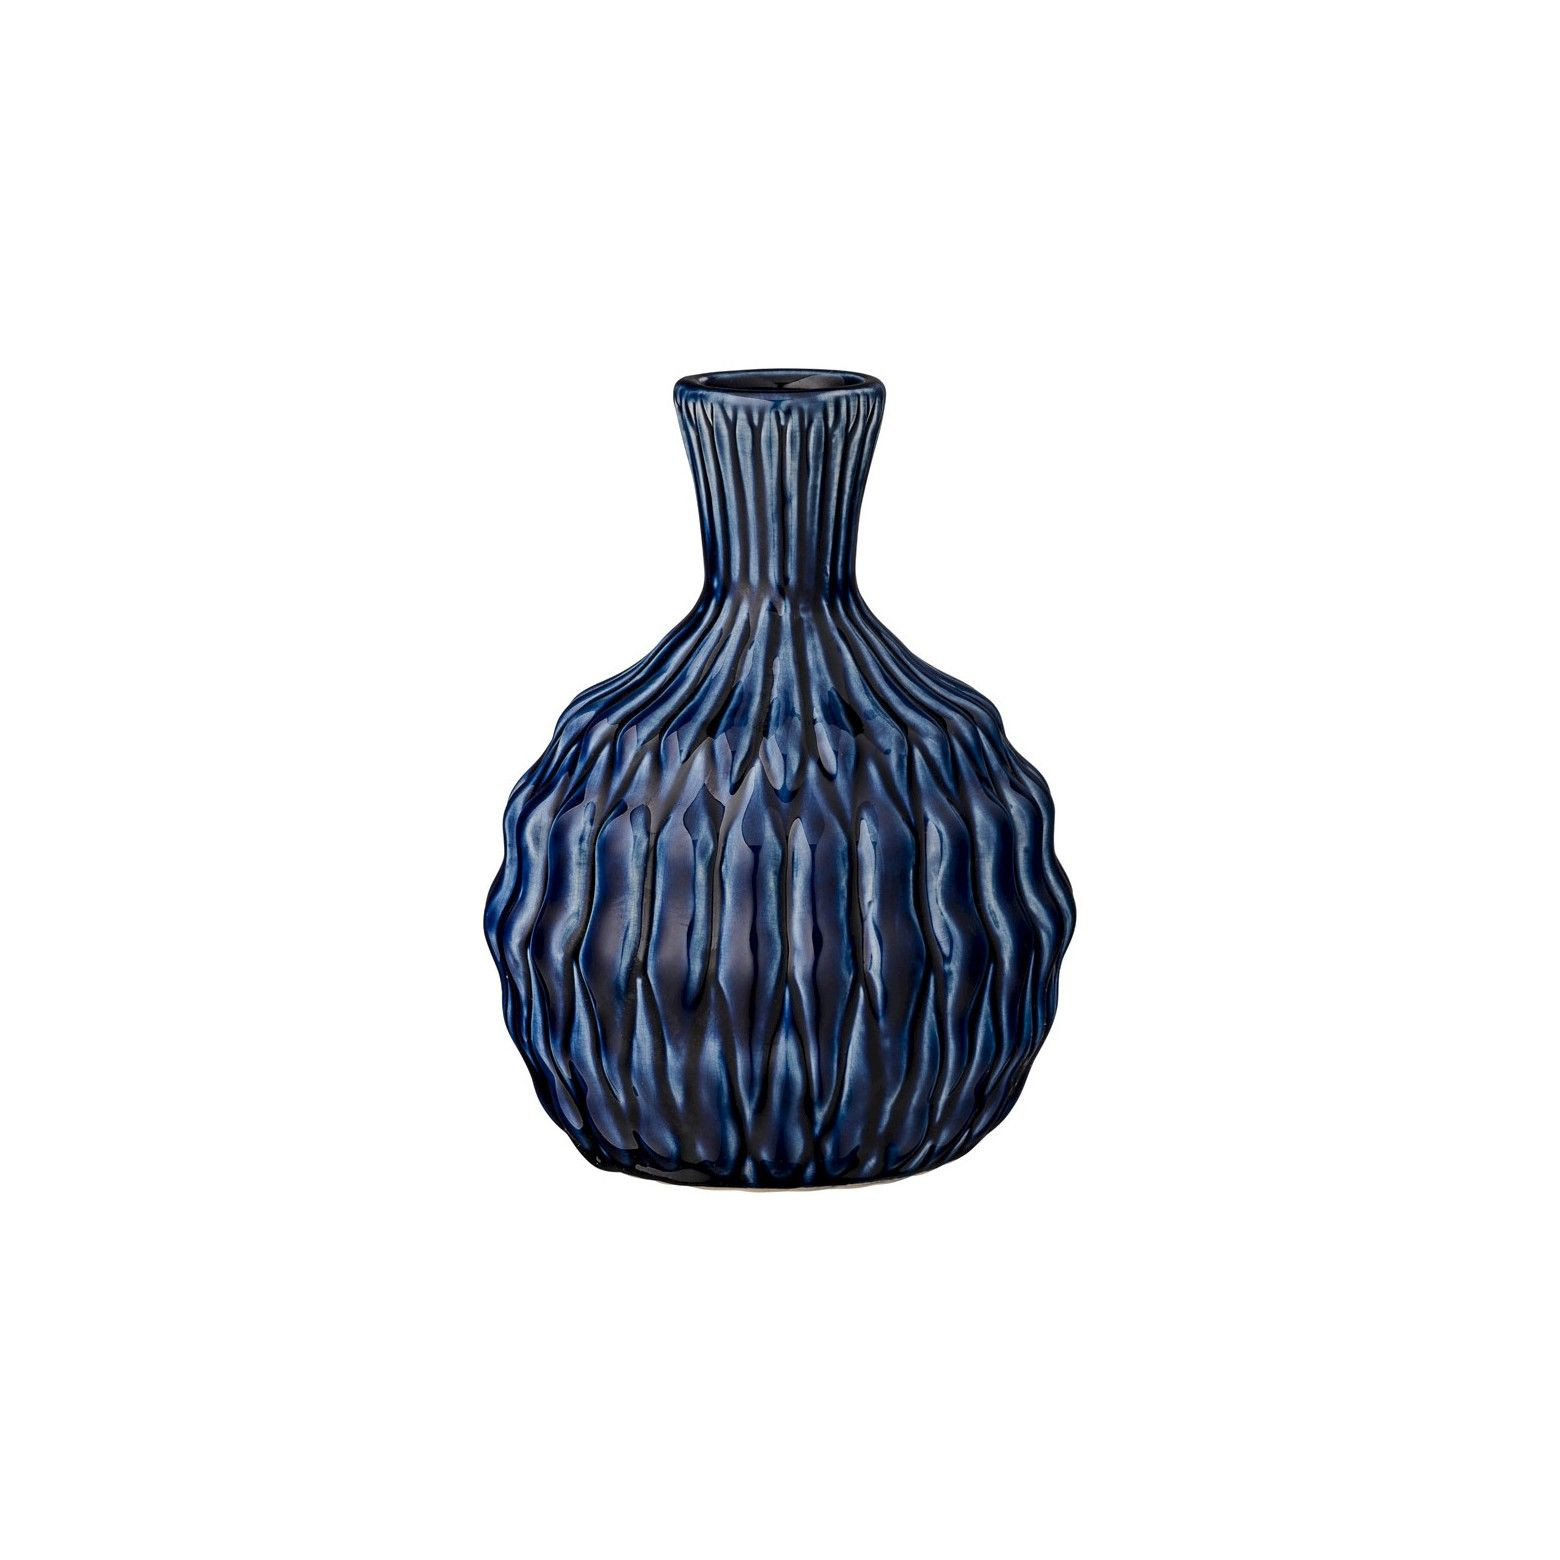 26 Fabulous Tall Wide Mouth Vases 2024 free download tall wide mouth vases of ceramic vase navy blue 6 3r studios ceramic vase navy and for ceramic vase navy blue 6 3r studios